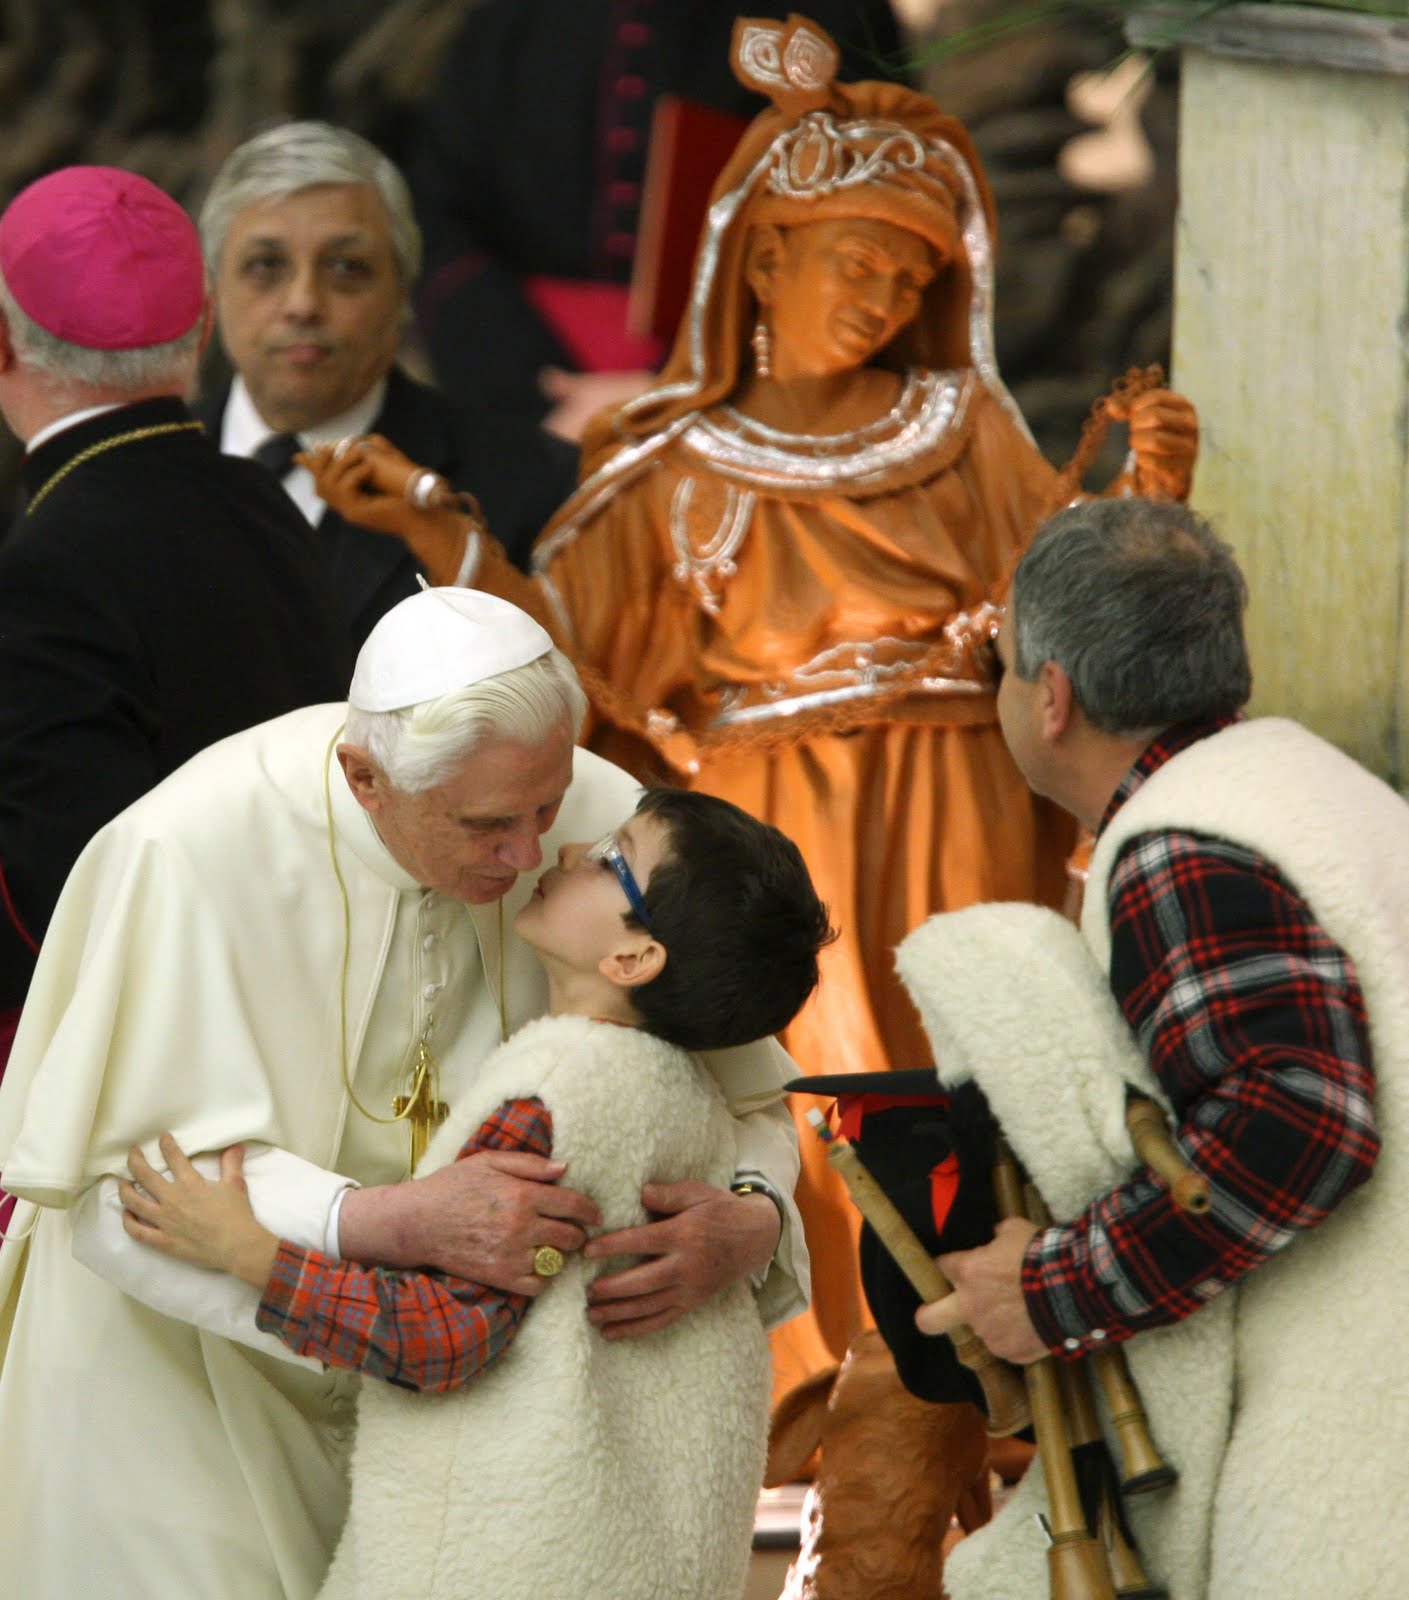 Pope+Benedict+Kissing+Child+on+the+lips+sexual+abuse+Catholic+church.jpg